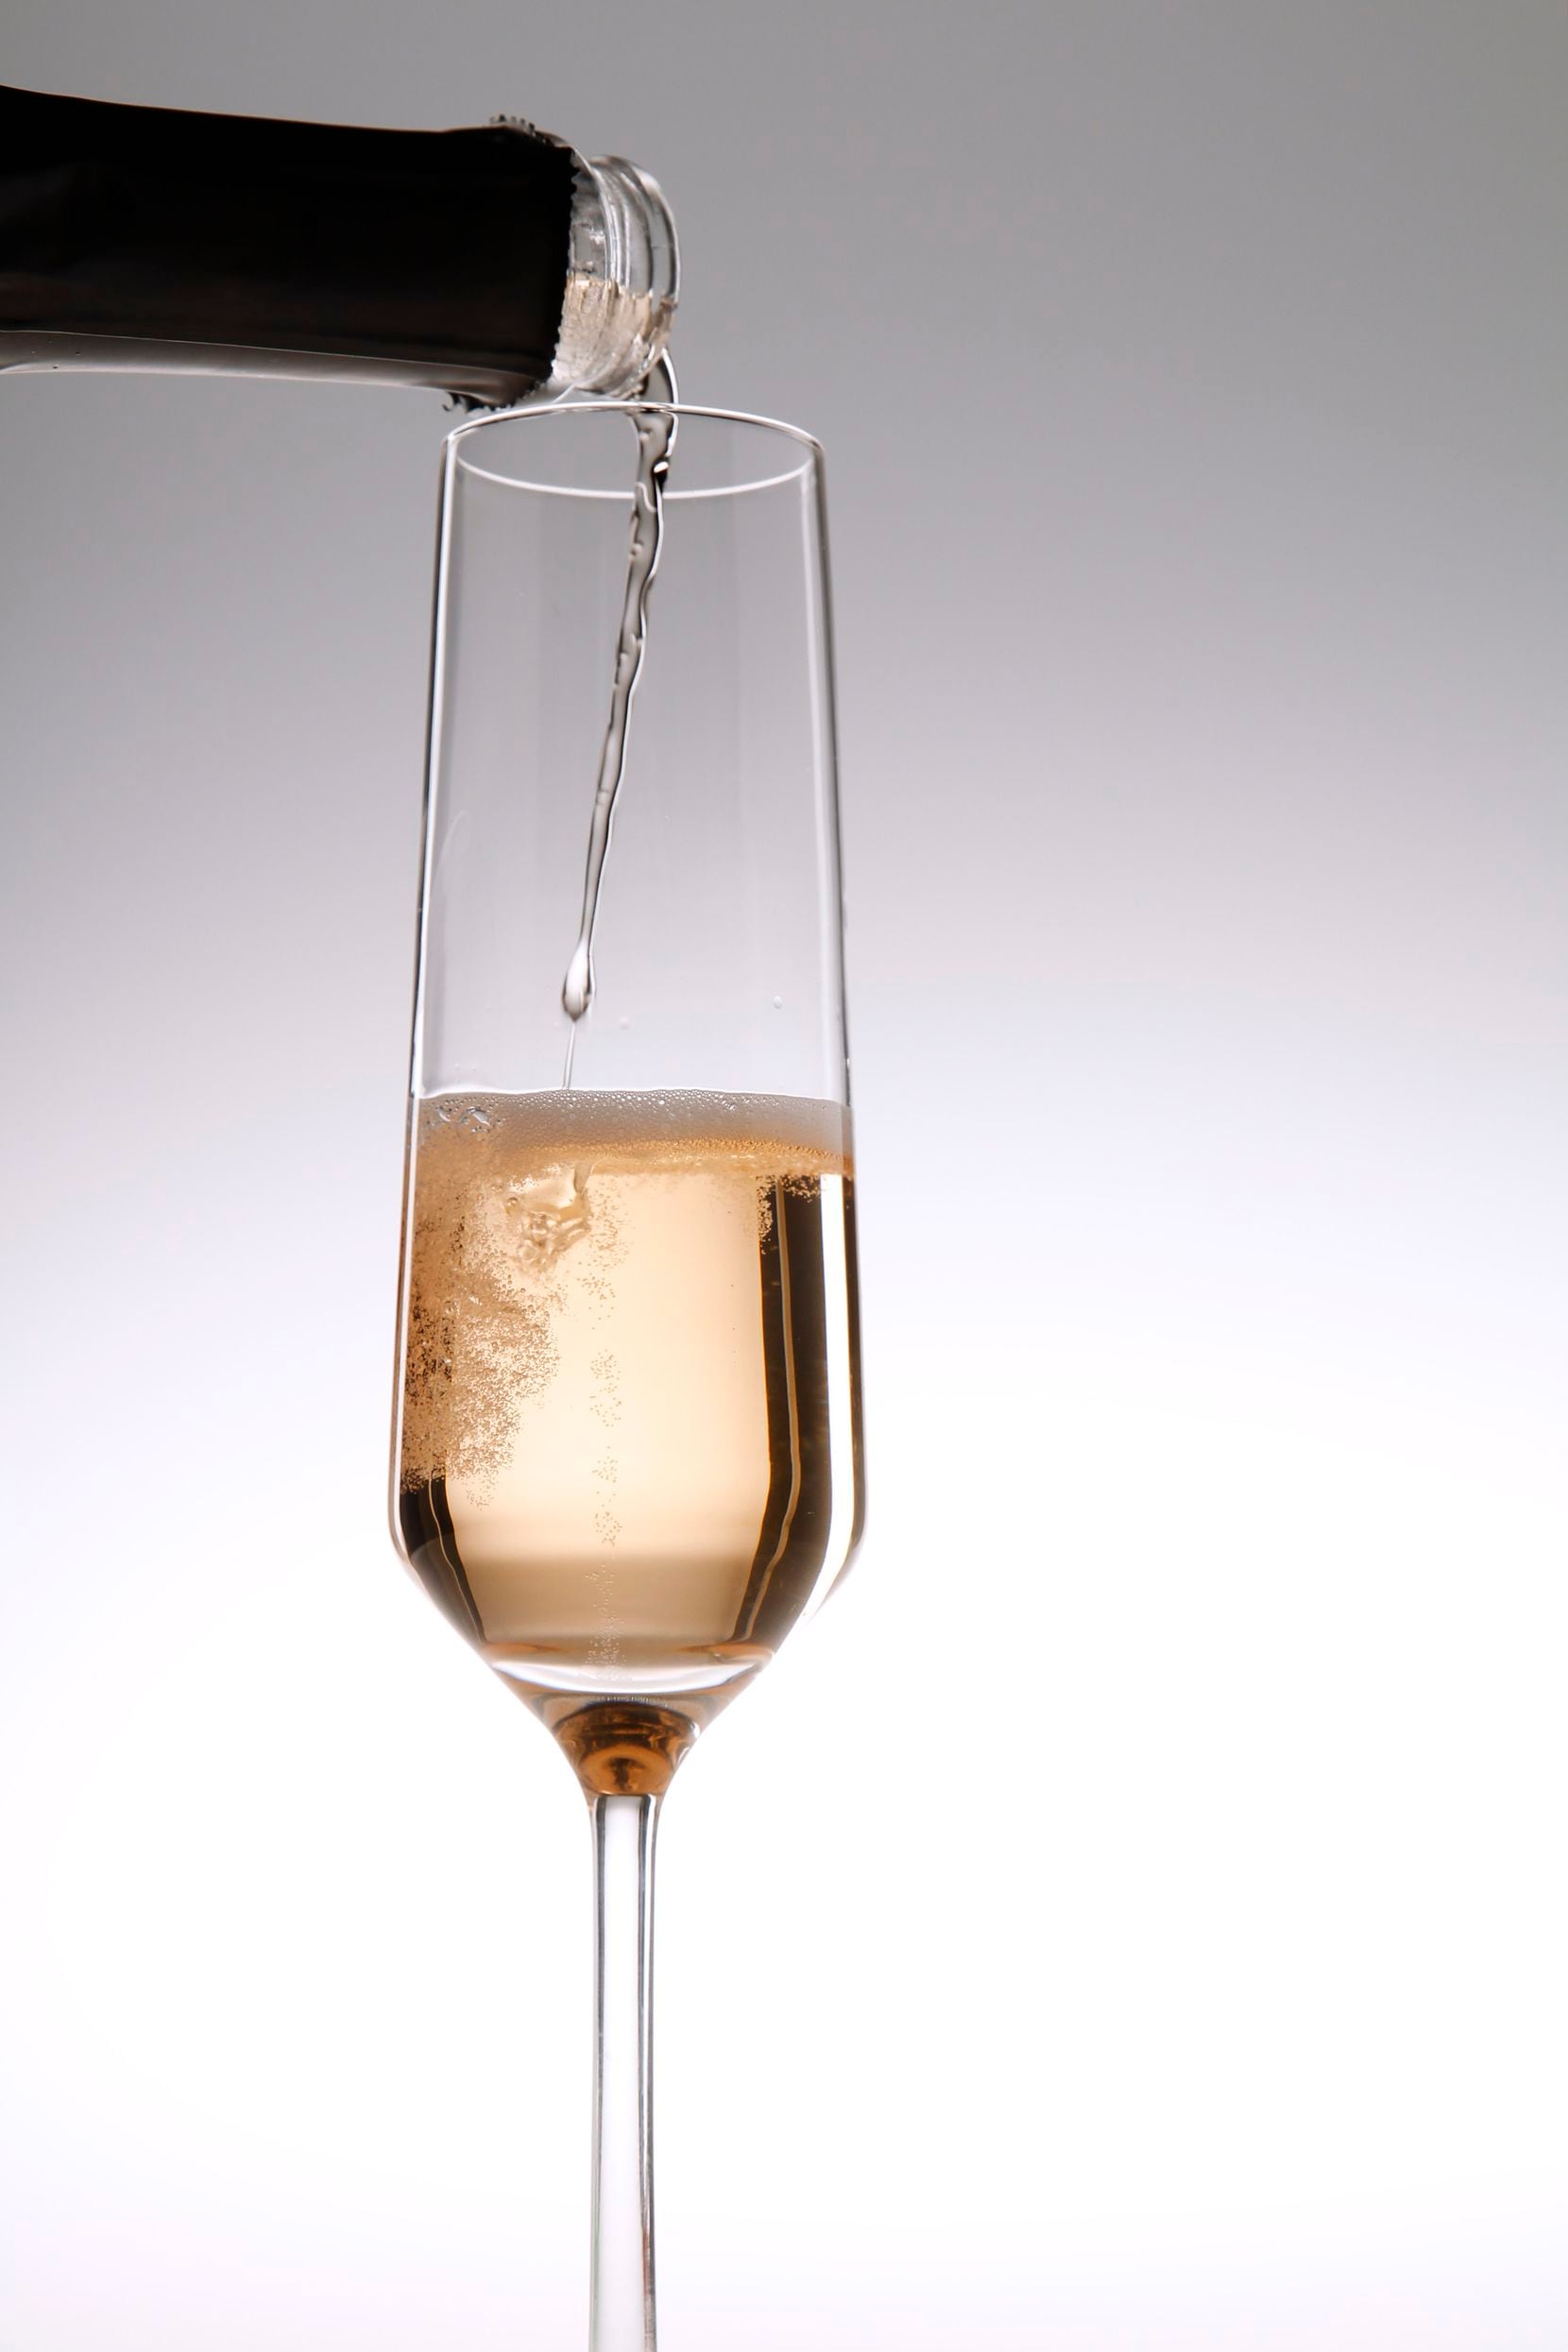 A sparkling rose wine from Spain is poured into a Champagne glass